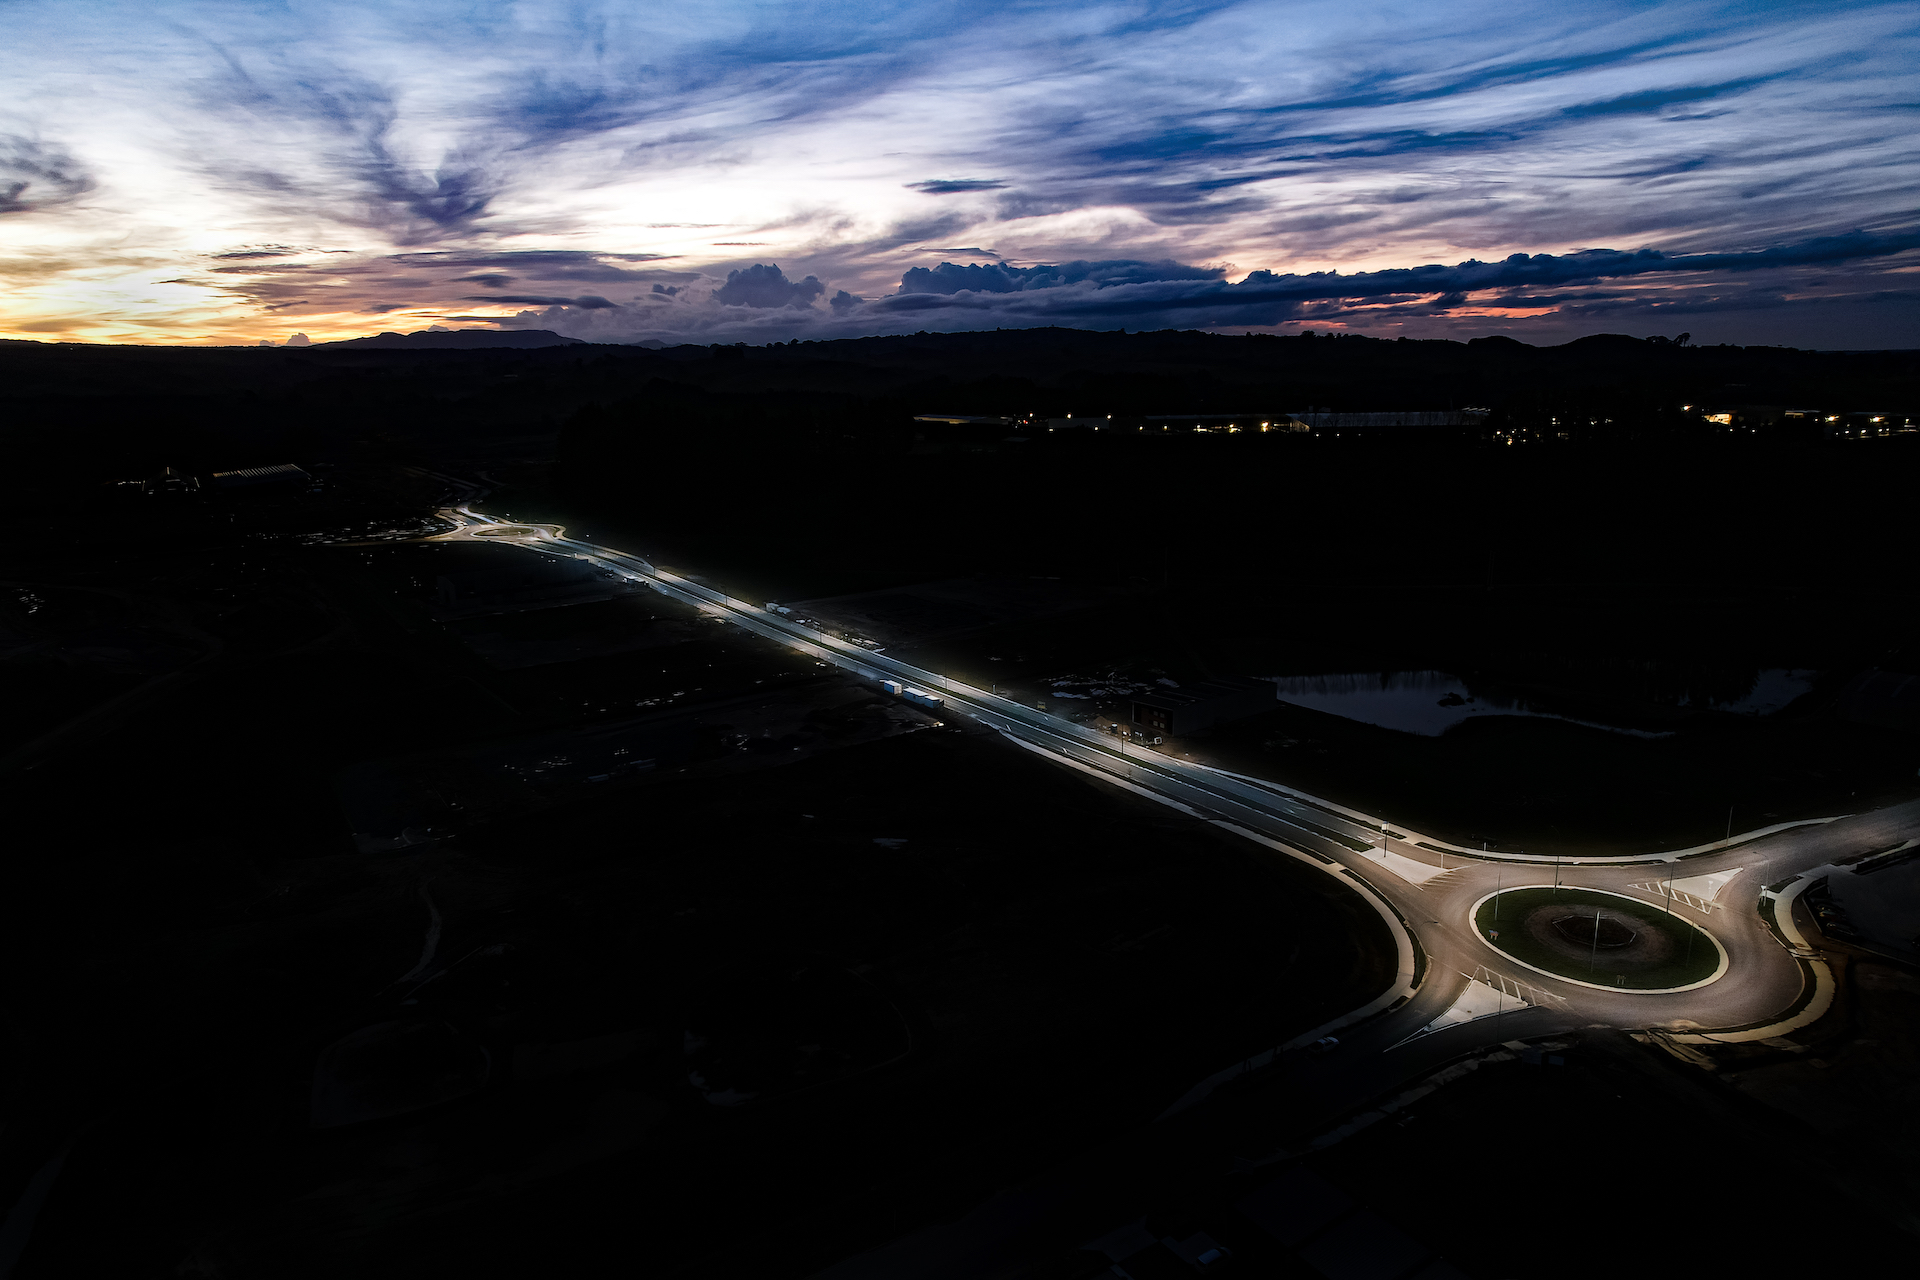 Tauriko road overview at night illuminated by ibex lighting solutions.